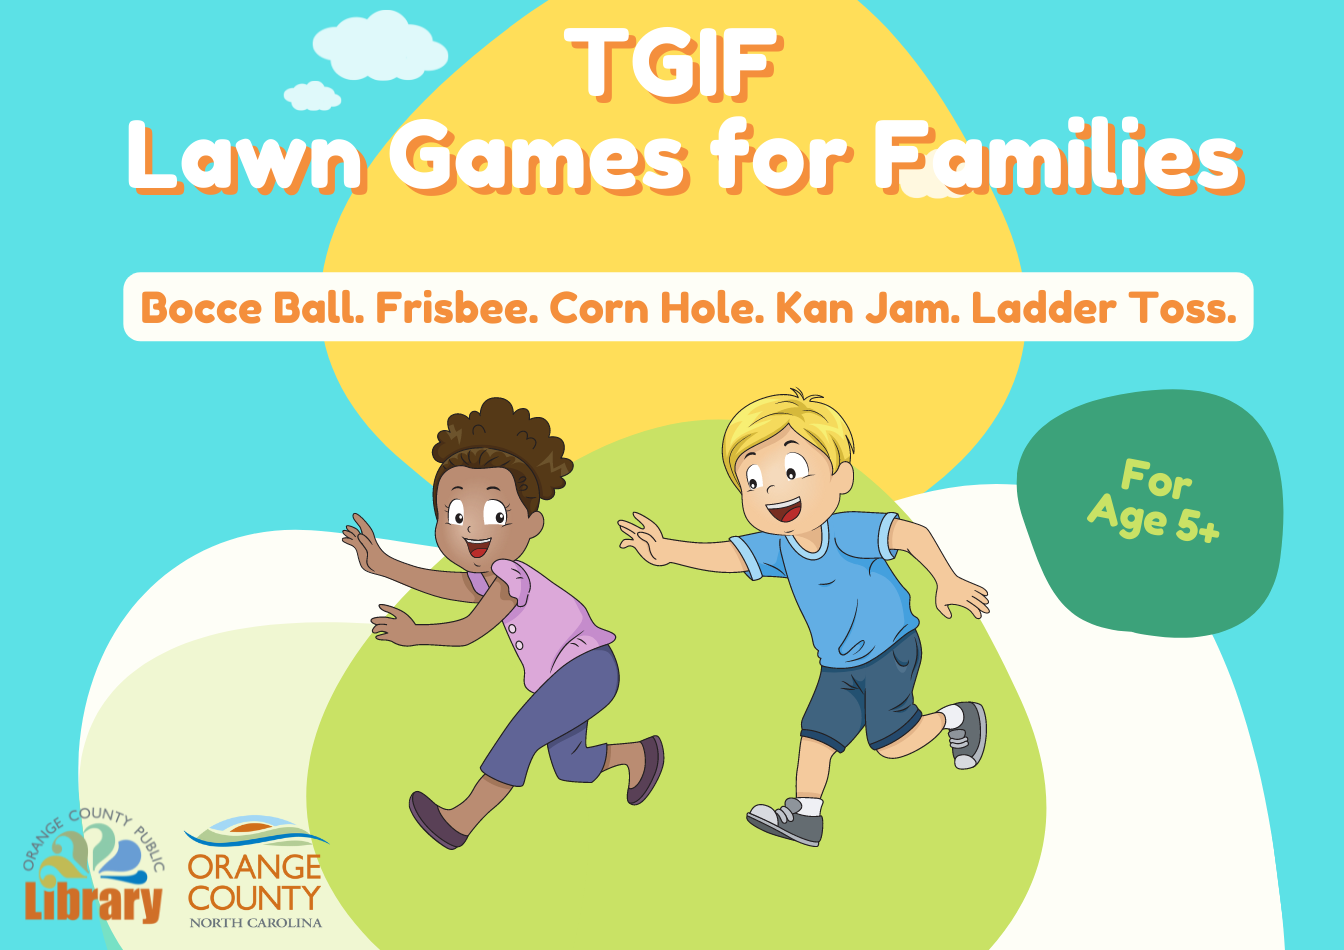 TGIF Lawn Games for Families